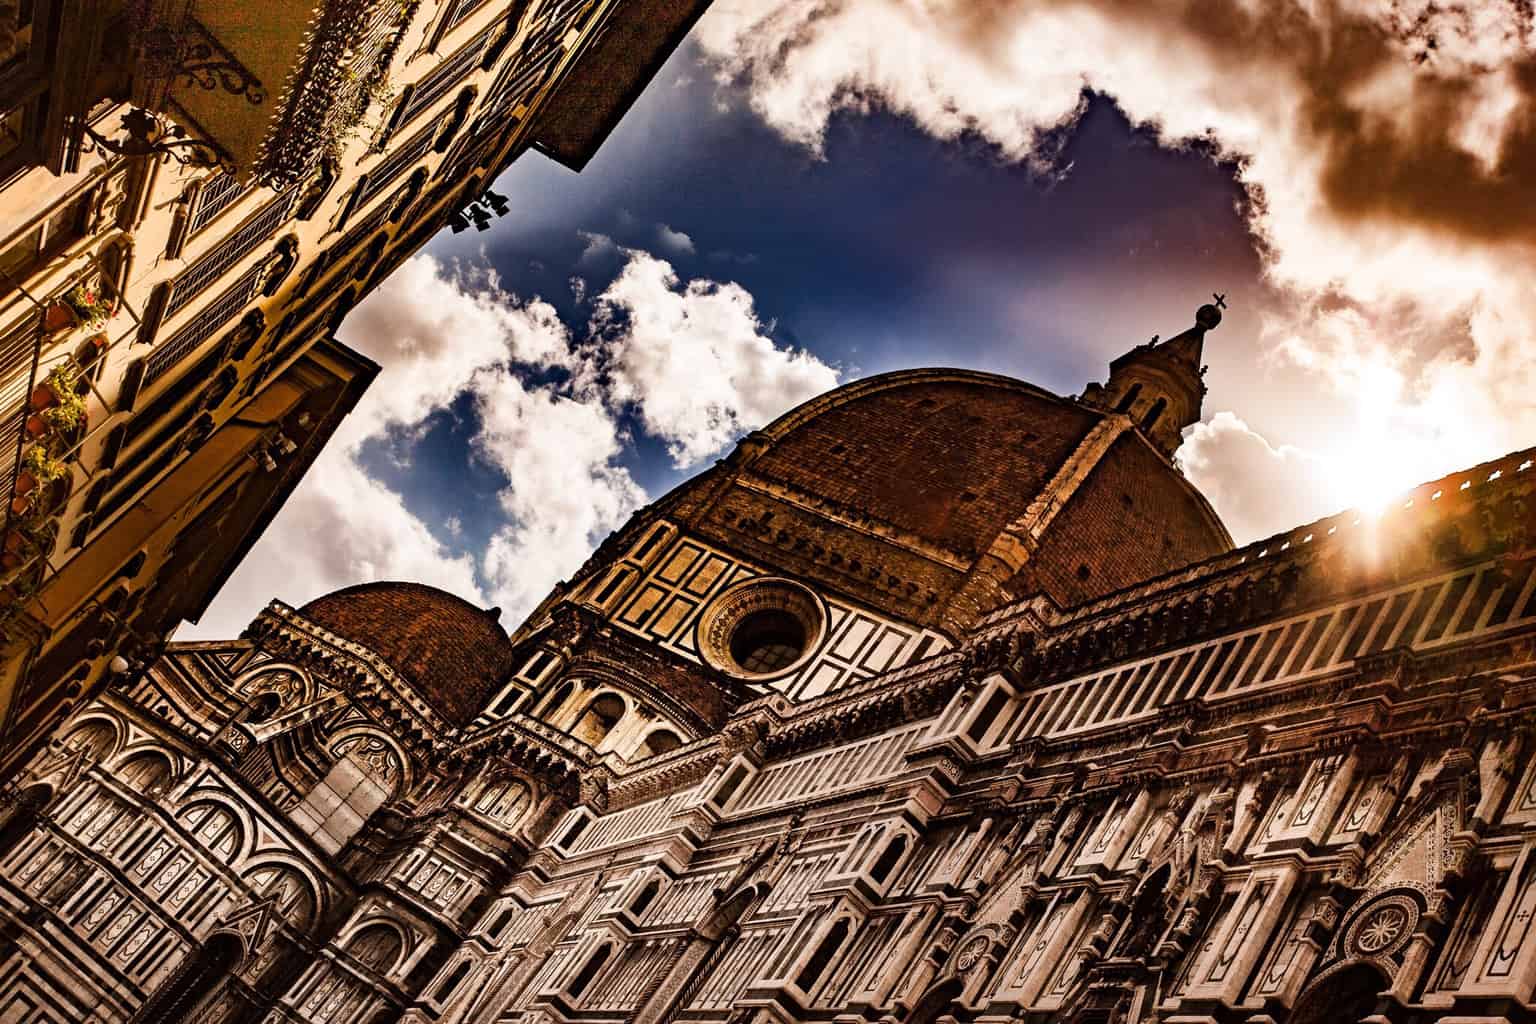  Duomo, Florence, Italy, by Rick McEvoy Architectural Photographer   